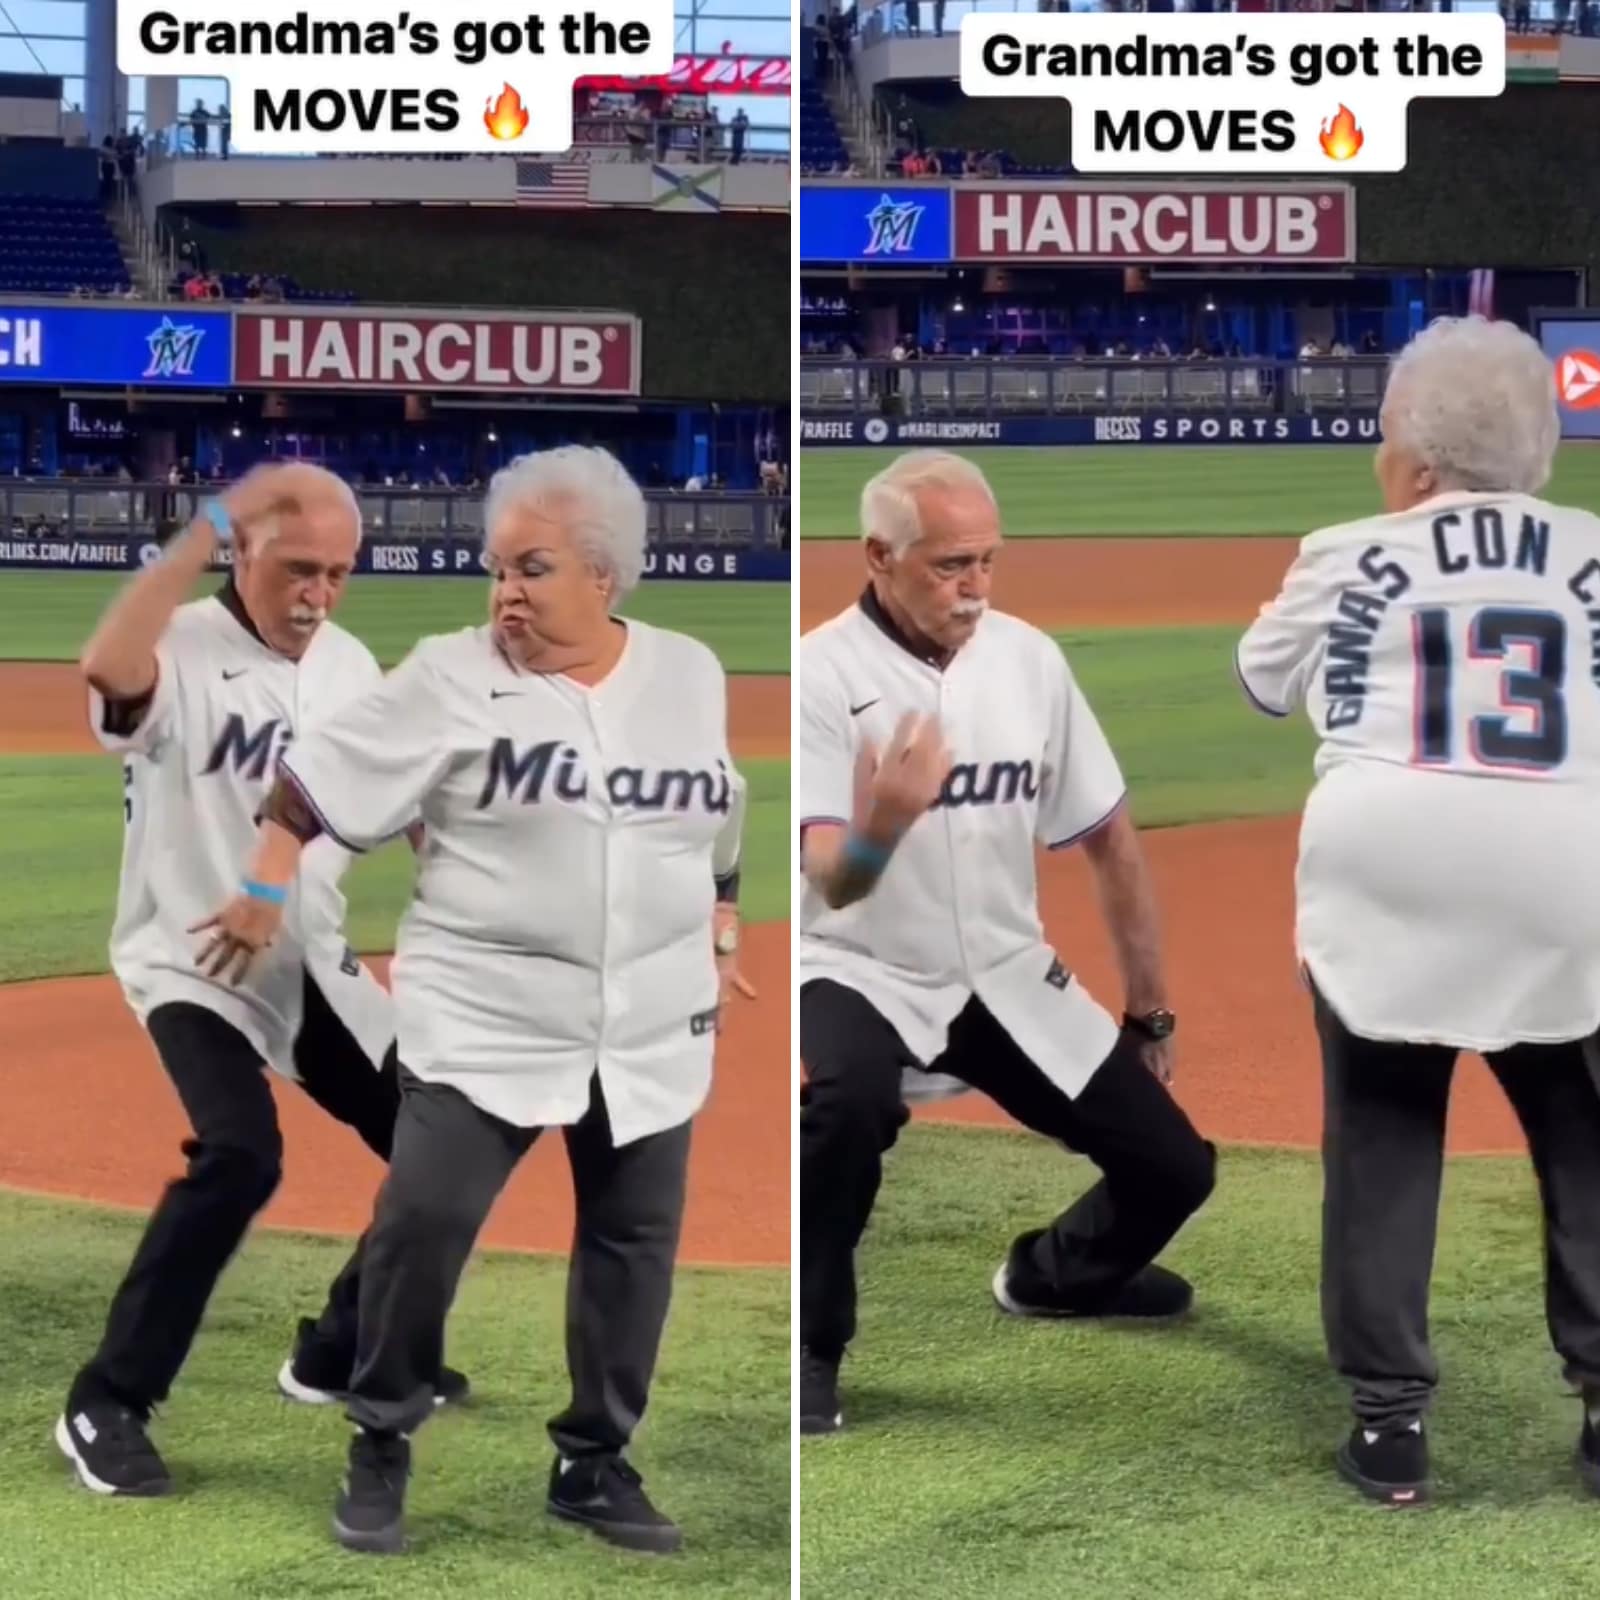 WATCH: Elderly Couple Dancing On Baseball Field Will Give You Ageing Goals